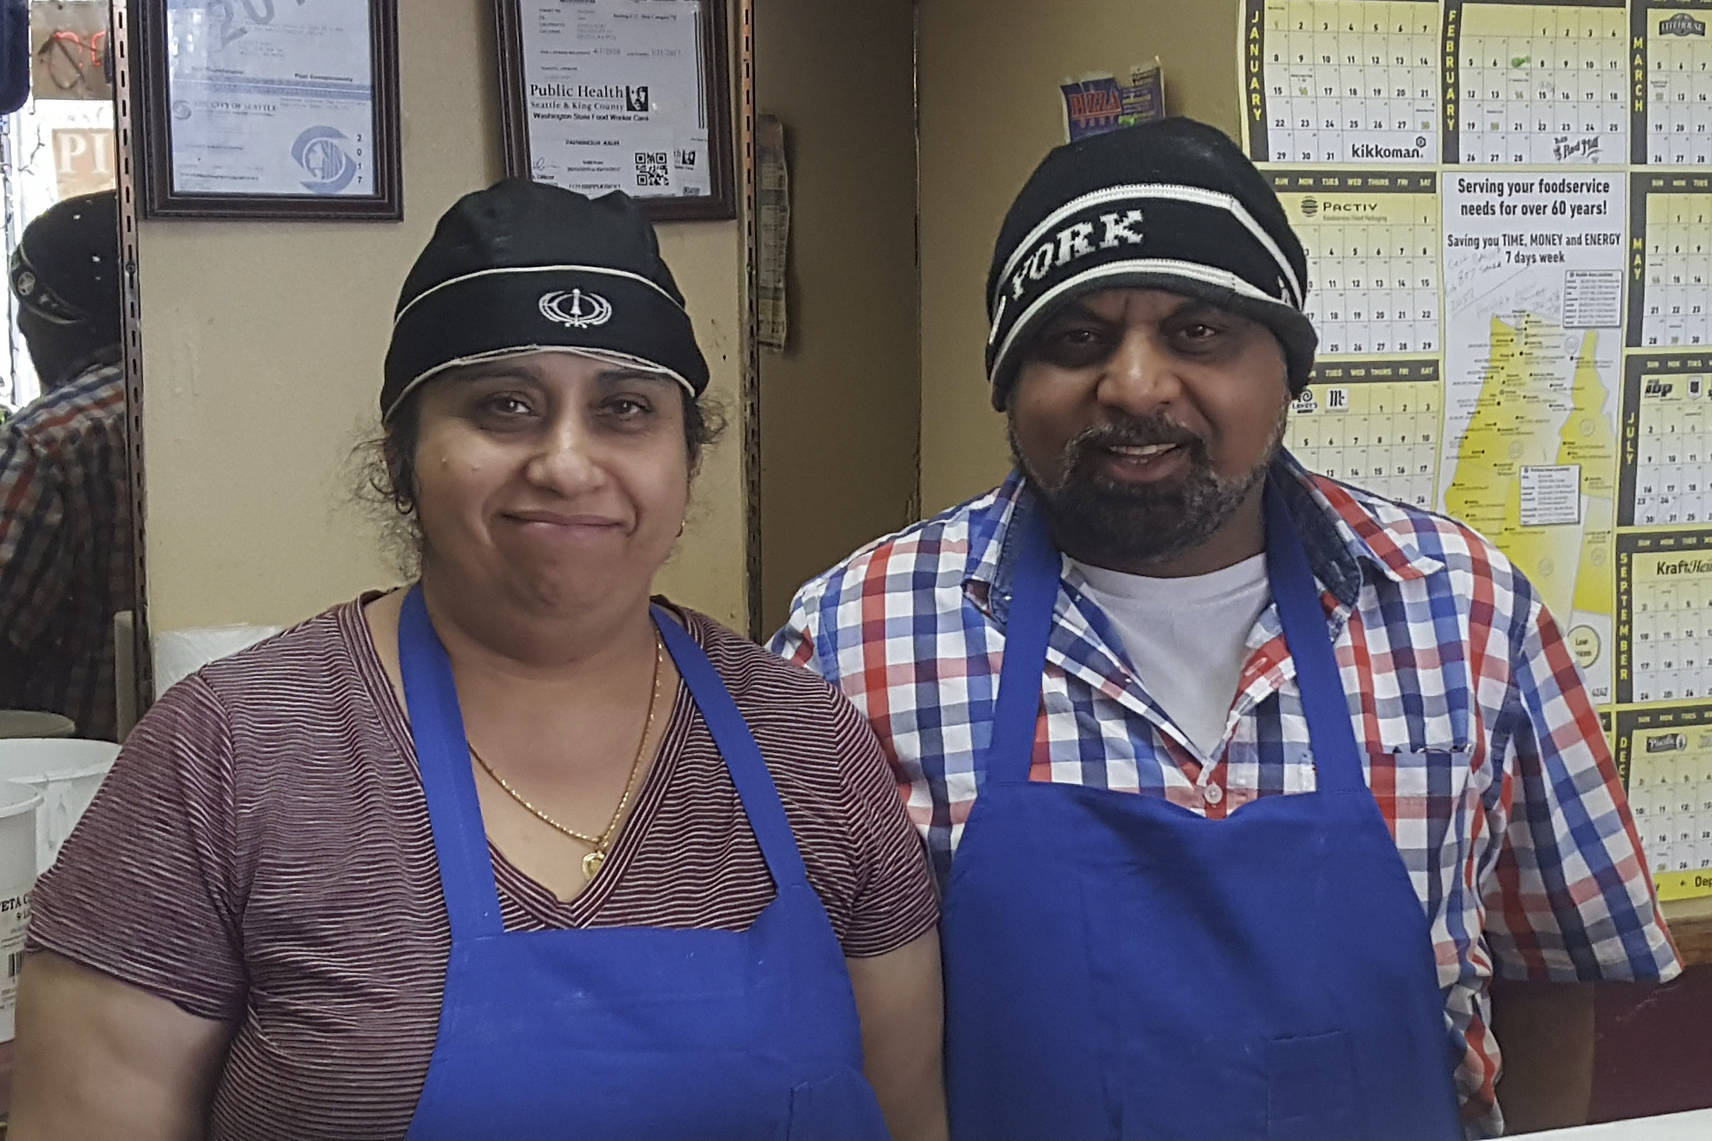 Jagajit Singh Samra and his wife Parwinder in their West Seattle business, A Pizza Mart. Courtesy of Keep Seattle Livable for All